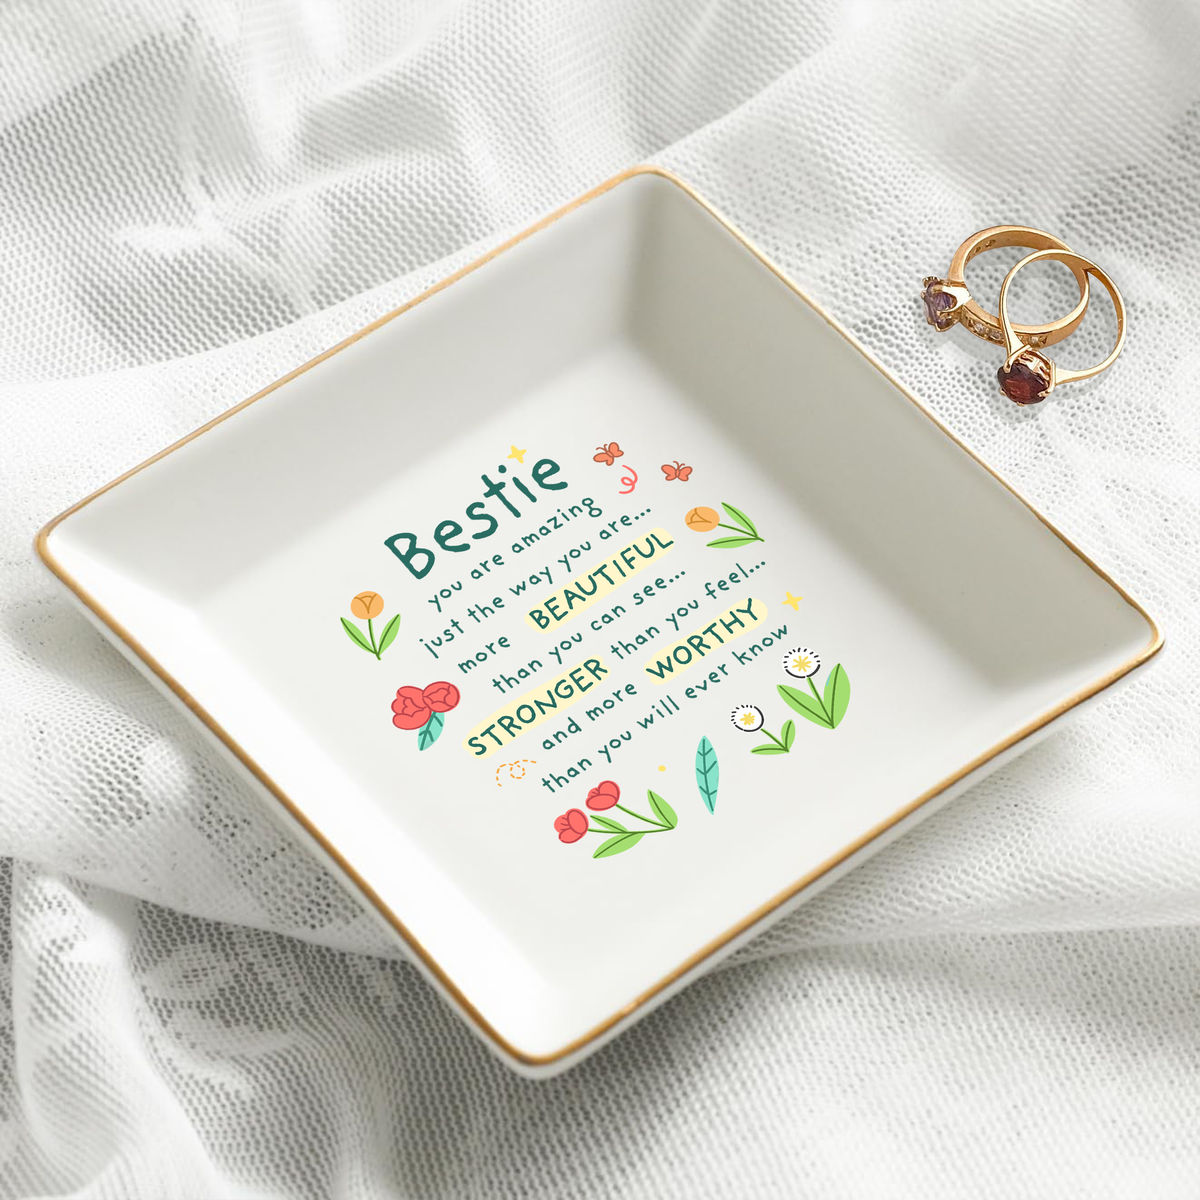 Personalized Jewelry Tray - Jewelry Tray - BESTIE You are Amazing Just the way you are... More Beautiful than you can see... Stronger than you feel... & more worthy than you will ever know - Bridesmaid Gifts, Birthday Gift for Her, Graduation Gift, Bridal Shower Gift, Gift for Friends_1